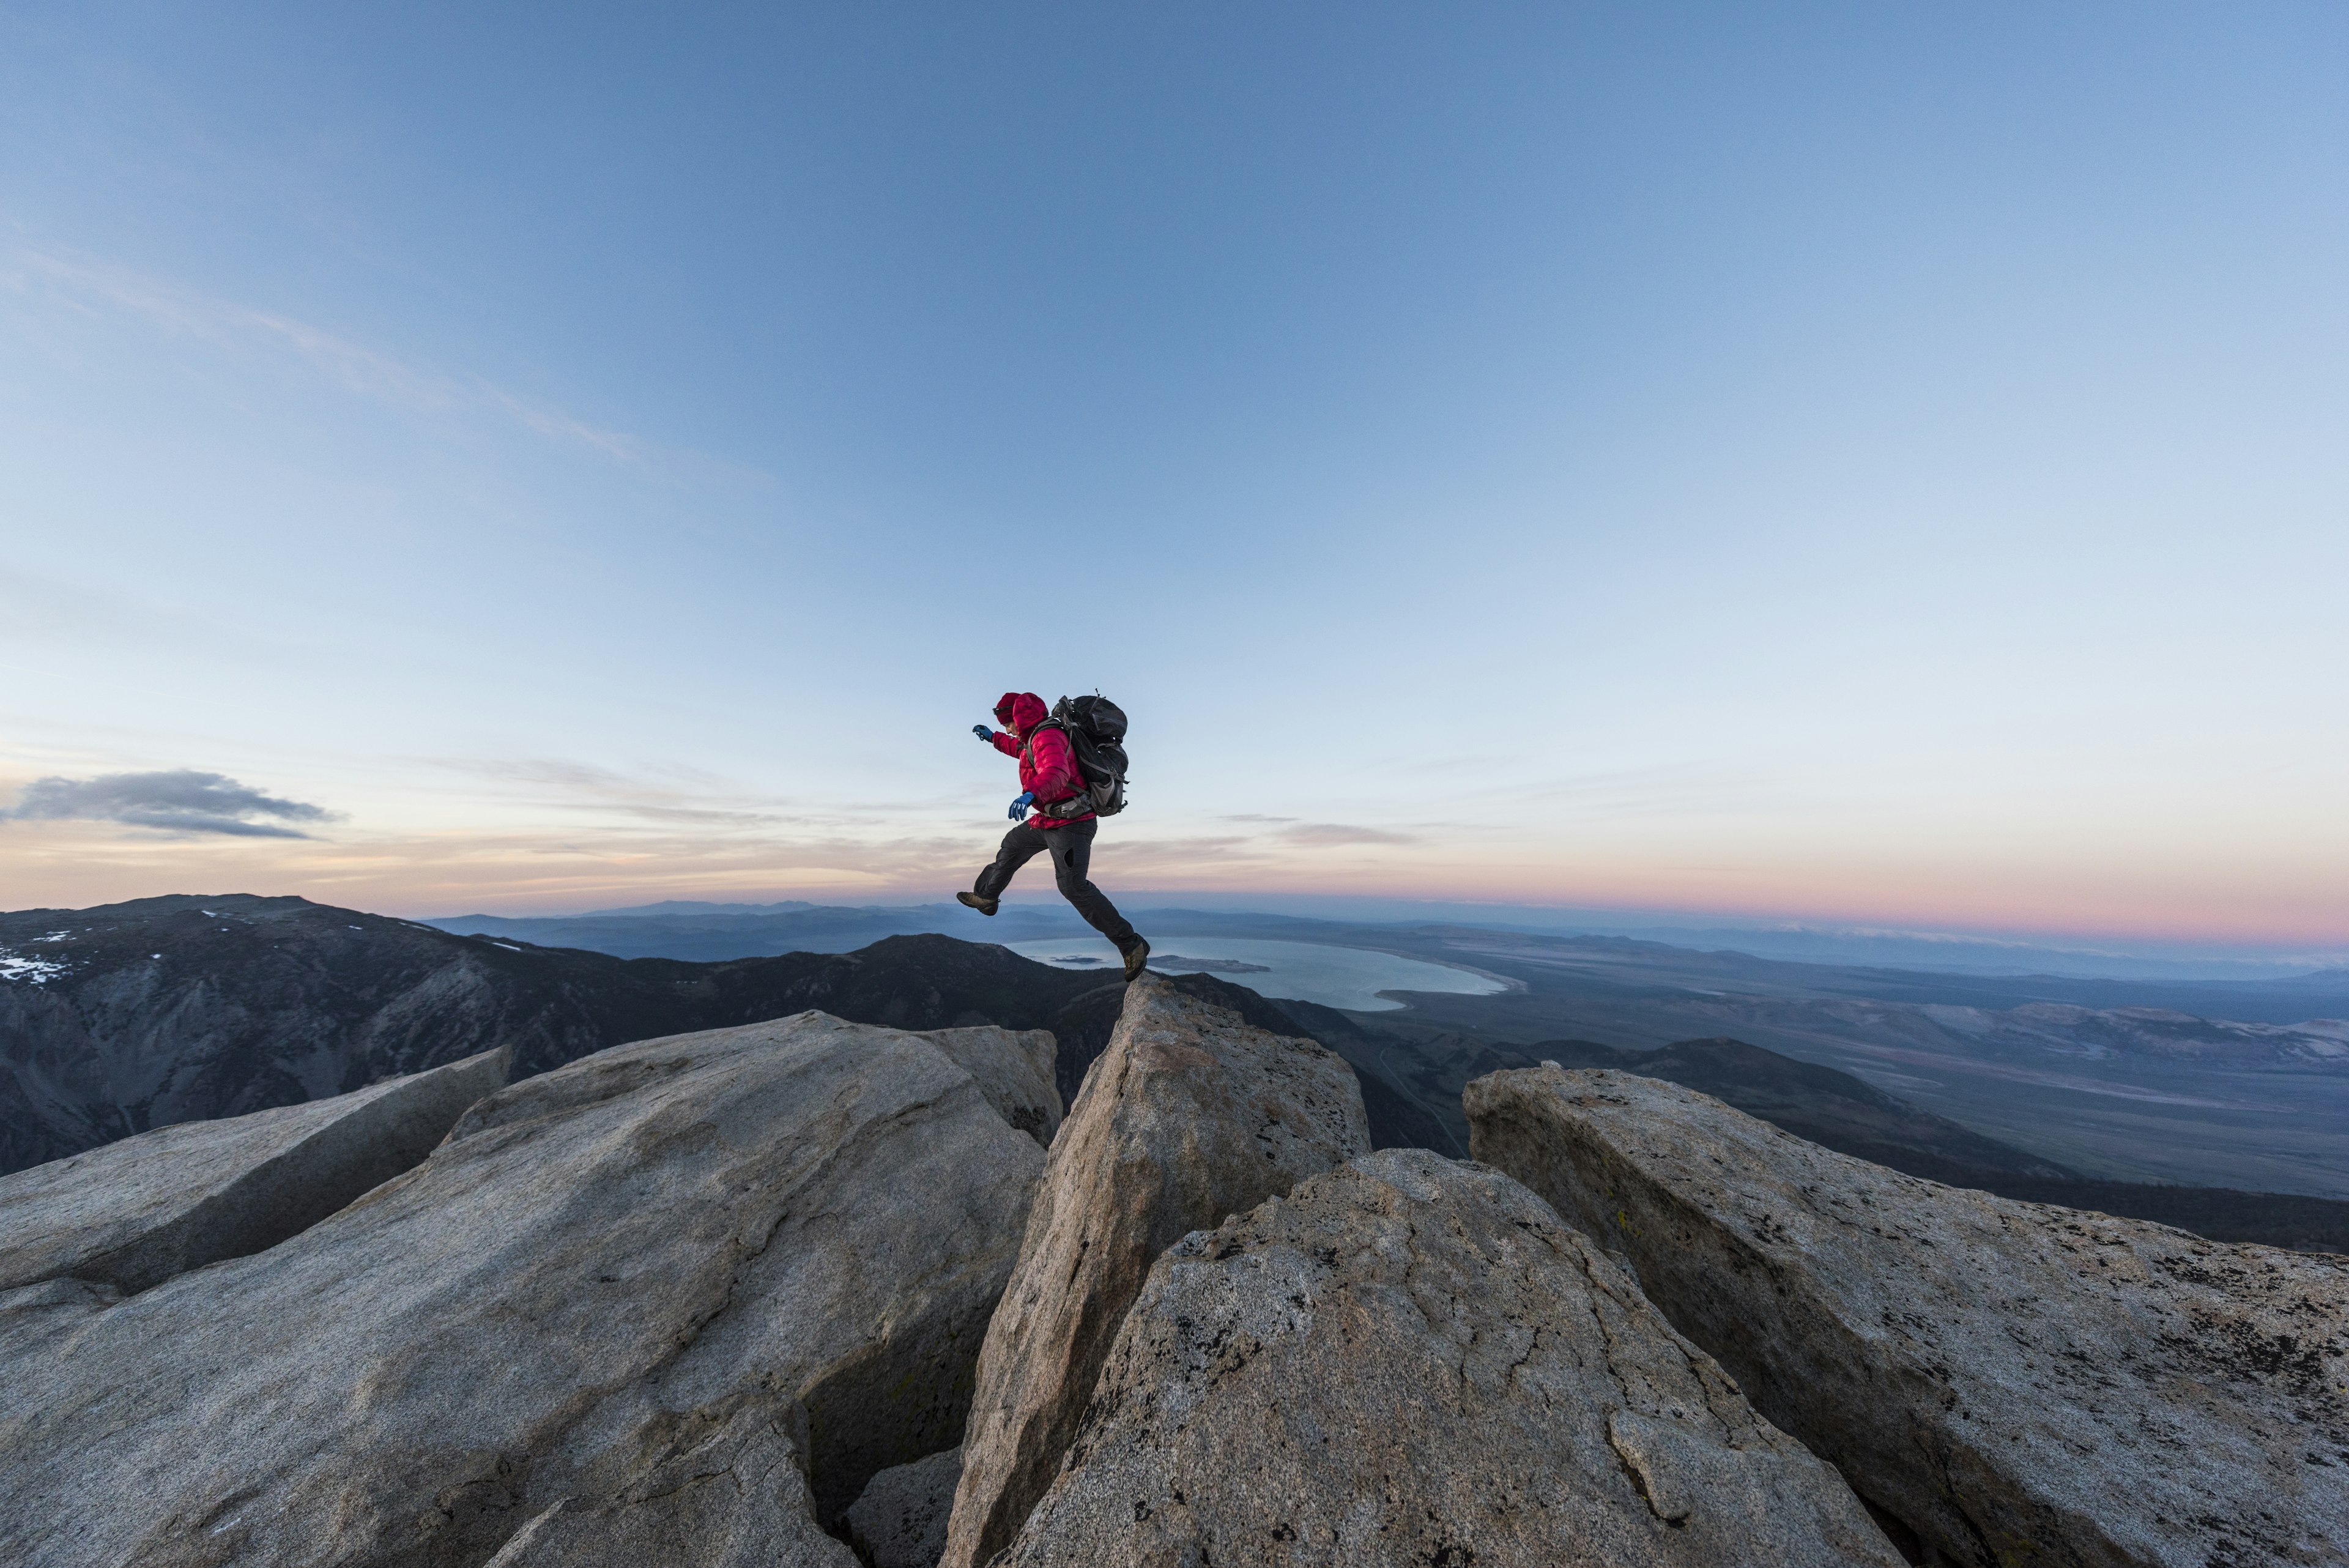 Strong mountain climber hiking and jumping on the summit ridge of a peak at sunset